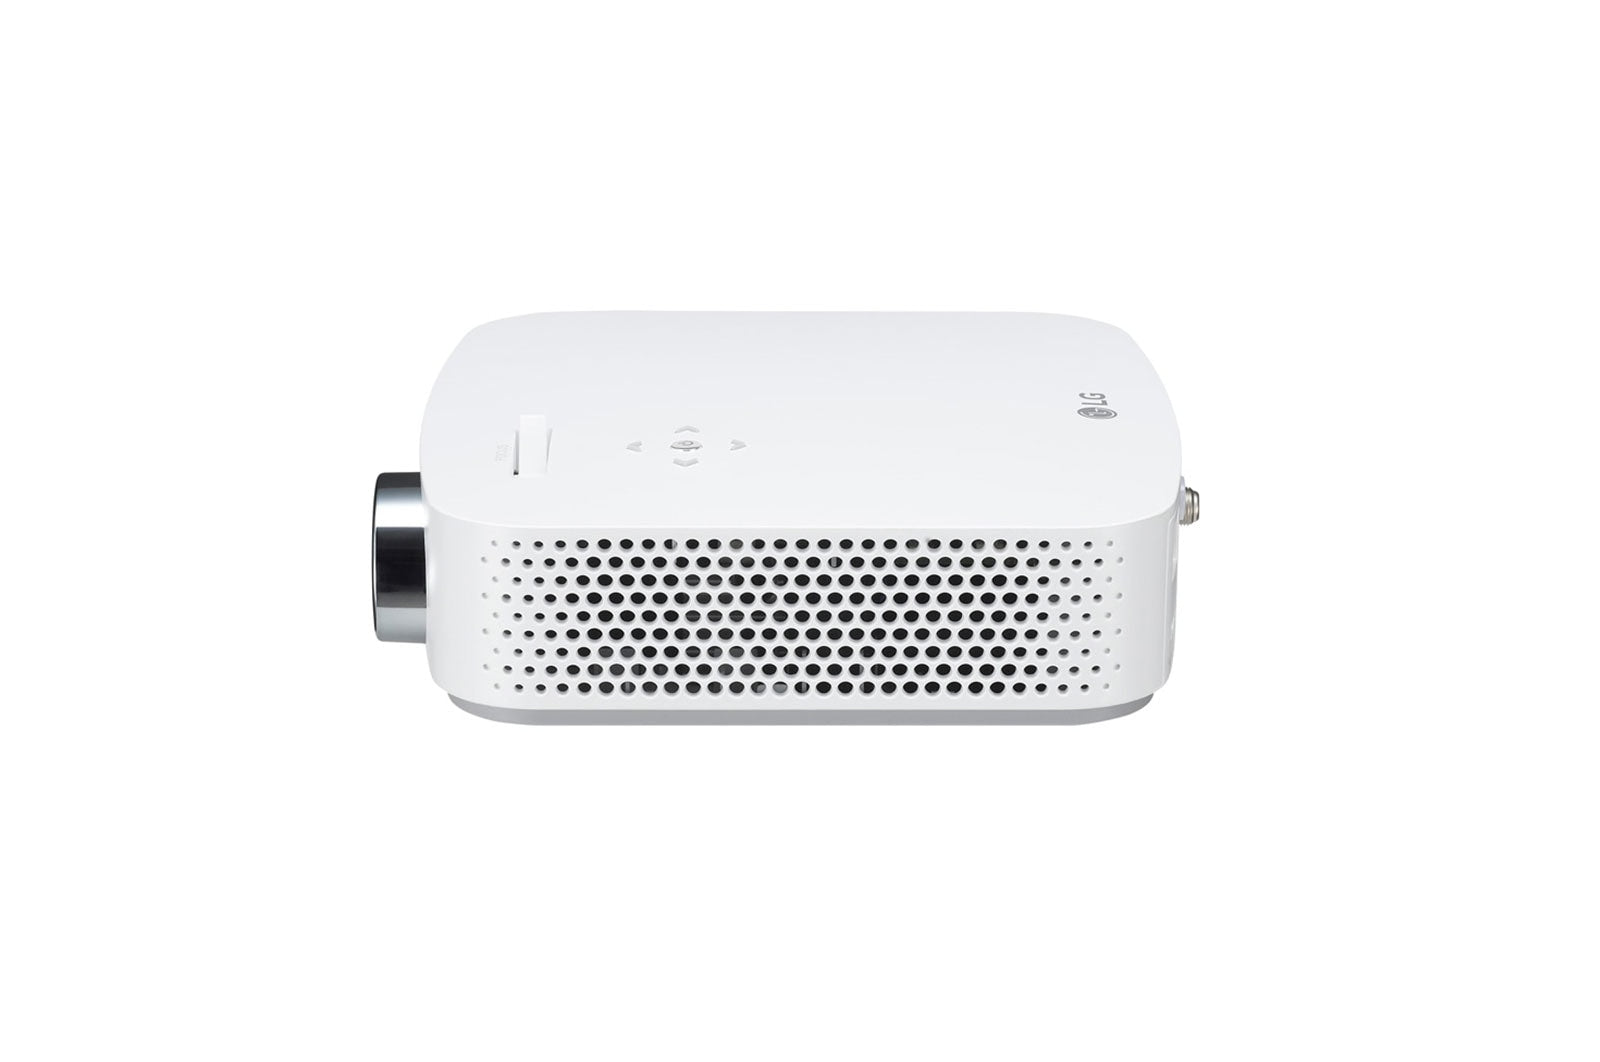 Full HD LED Smart Home Theater CineBeam Projector with Built-In Battery LED RGB 100,000:1